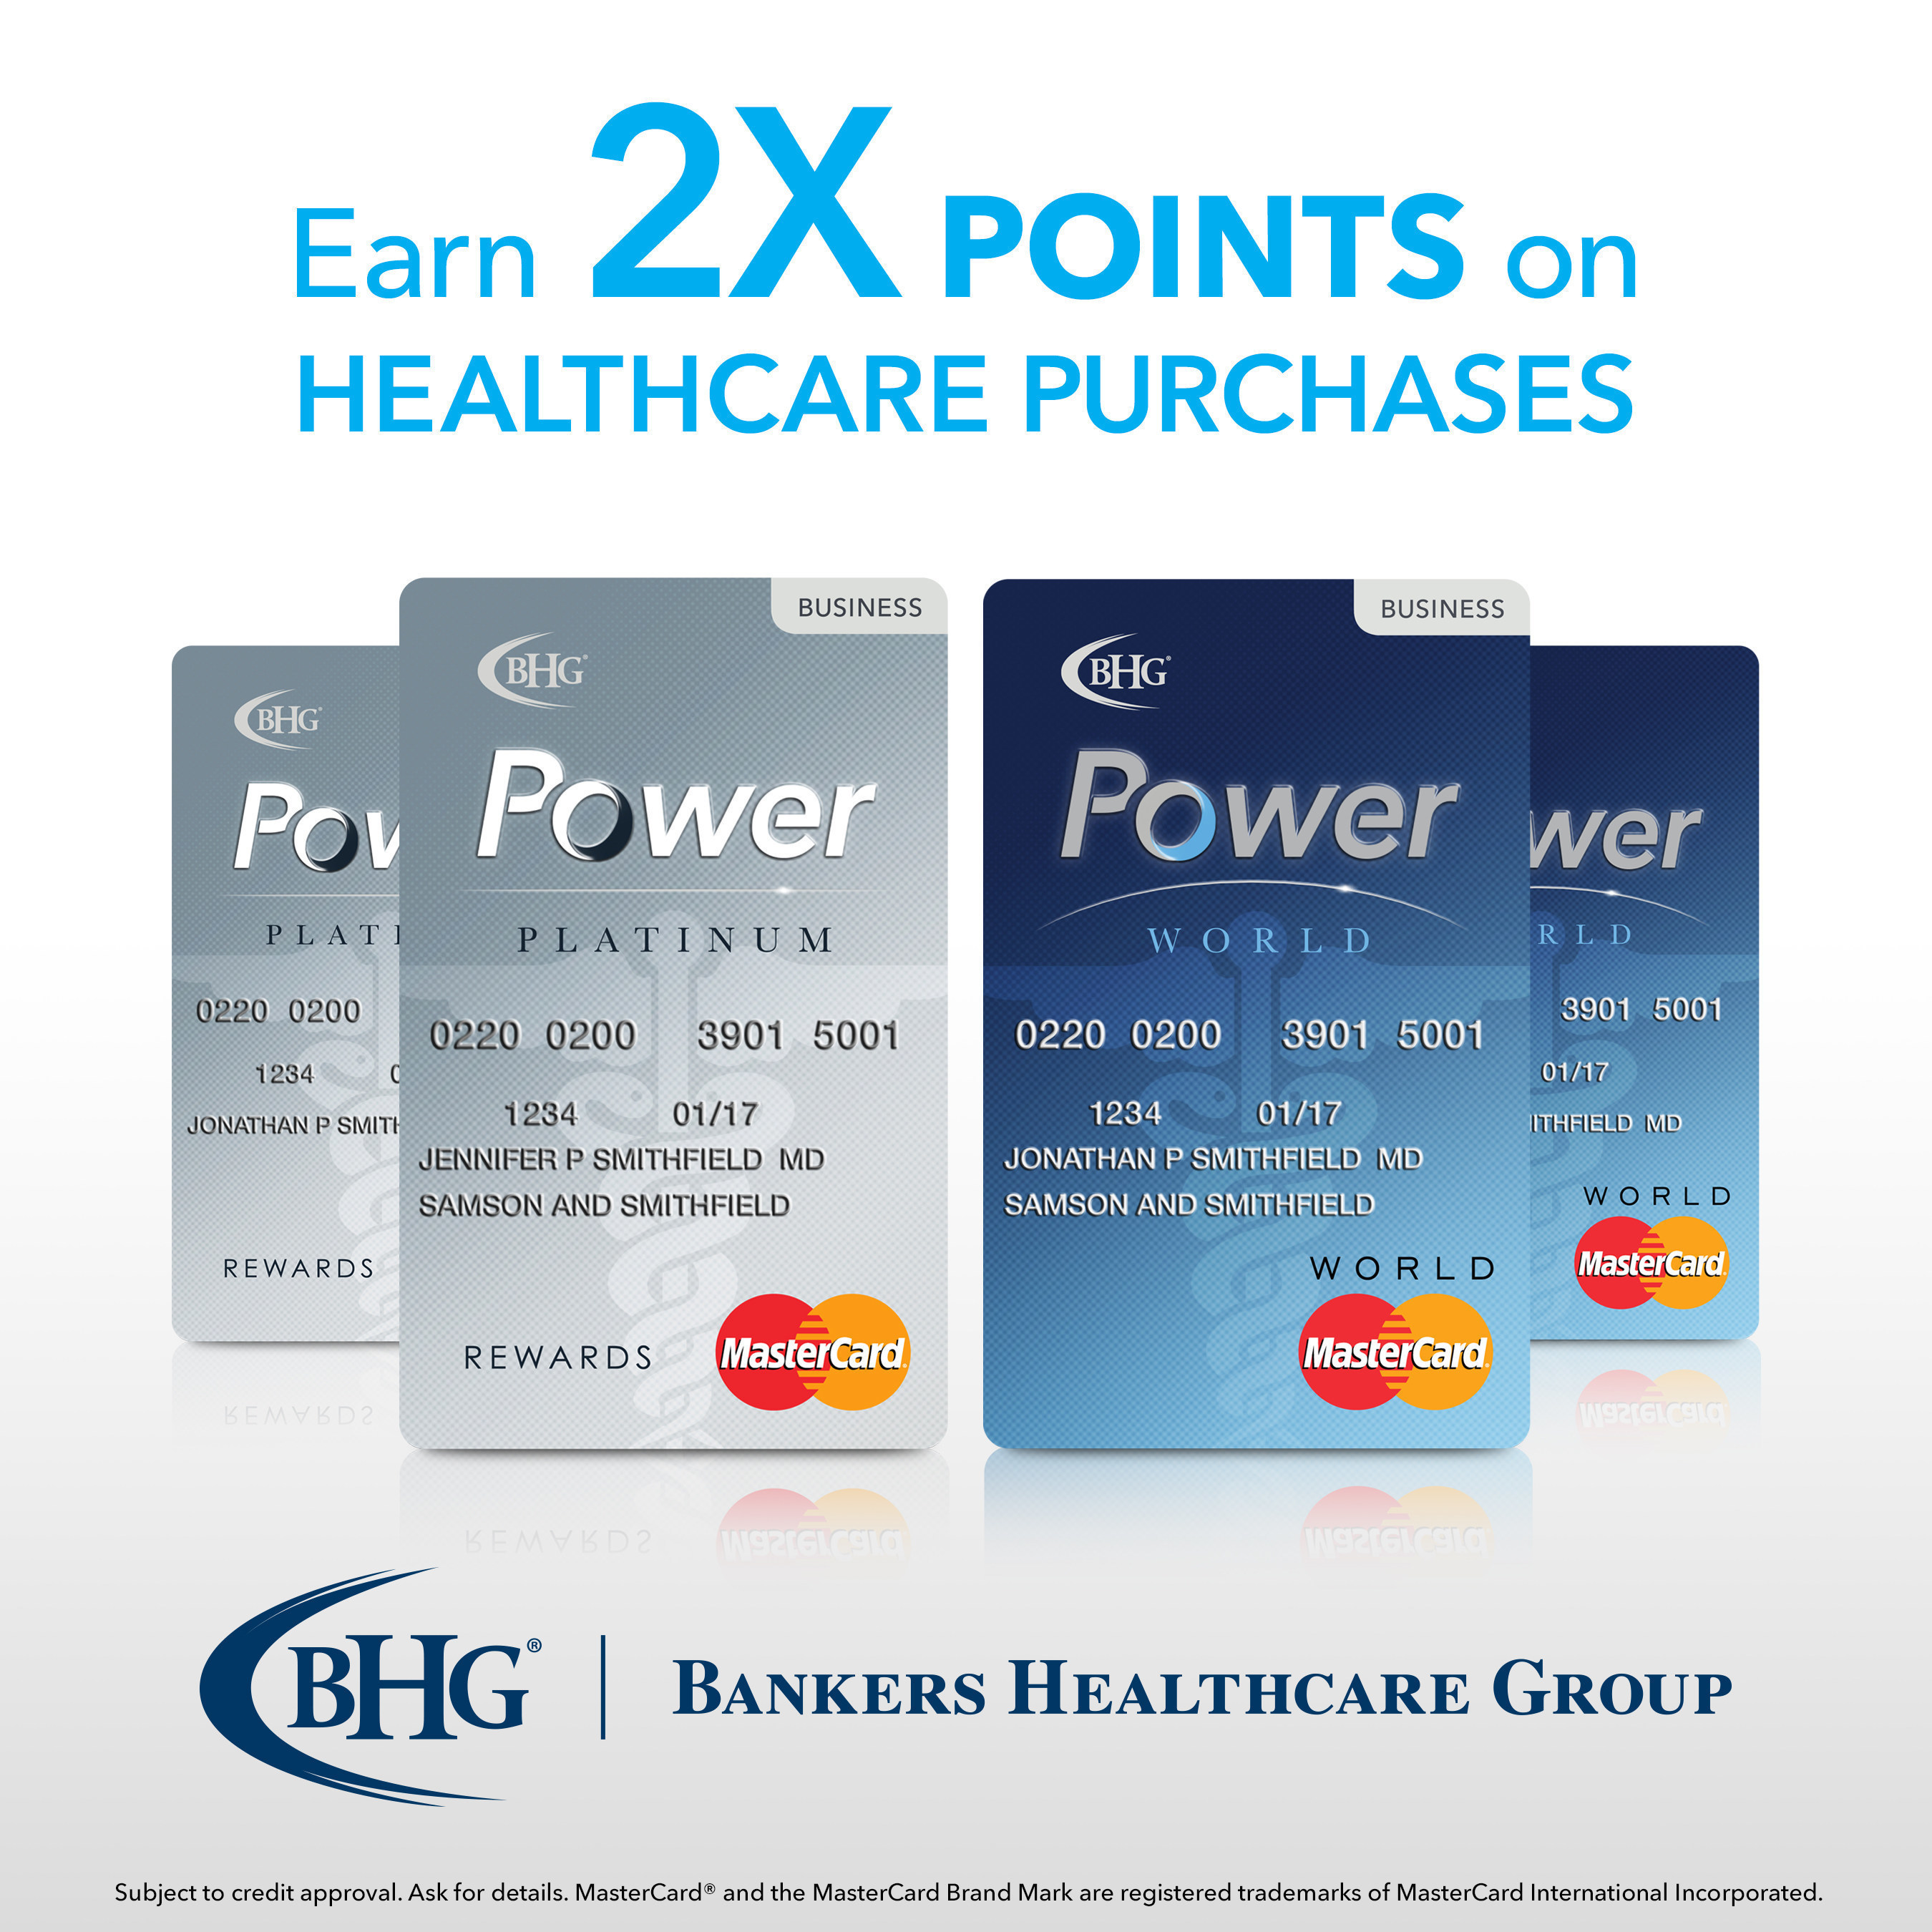 The BHG Power MasterCard(R) is designed with features and benefits exclusively for healthcare professionals. Platinum Rewards and World cardholders earn double rewards points on eligible healthcare-related purchases like medical equipment and supplies, continuing education, as well as association and membership fees.